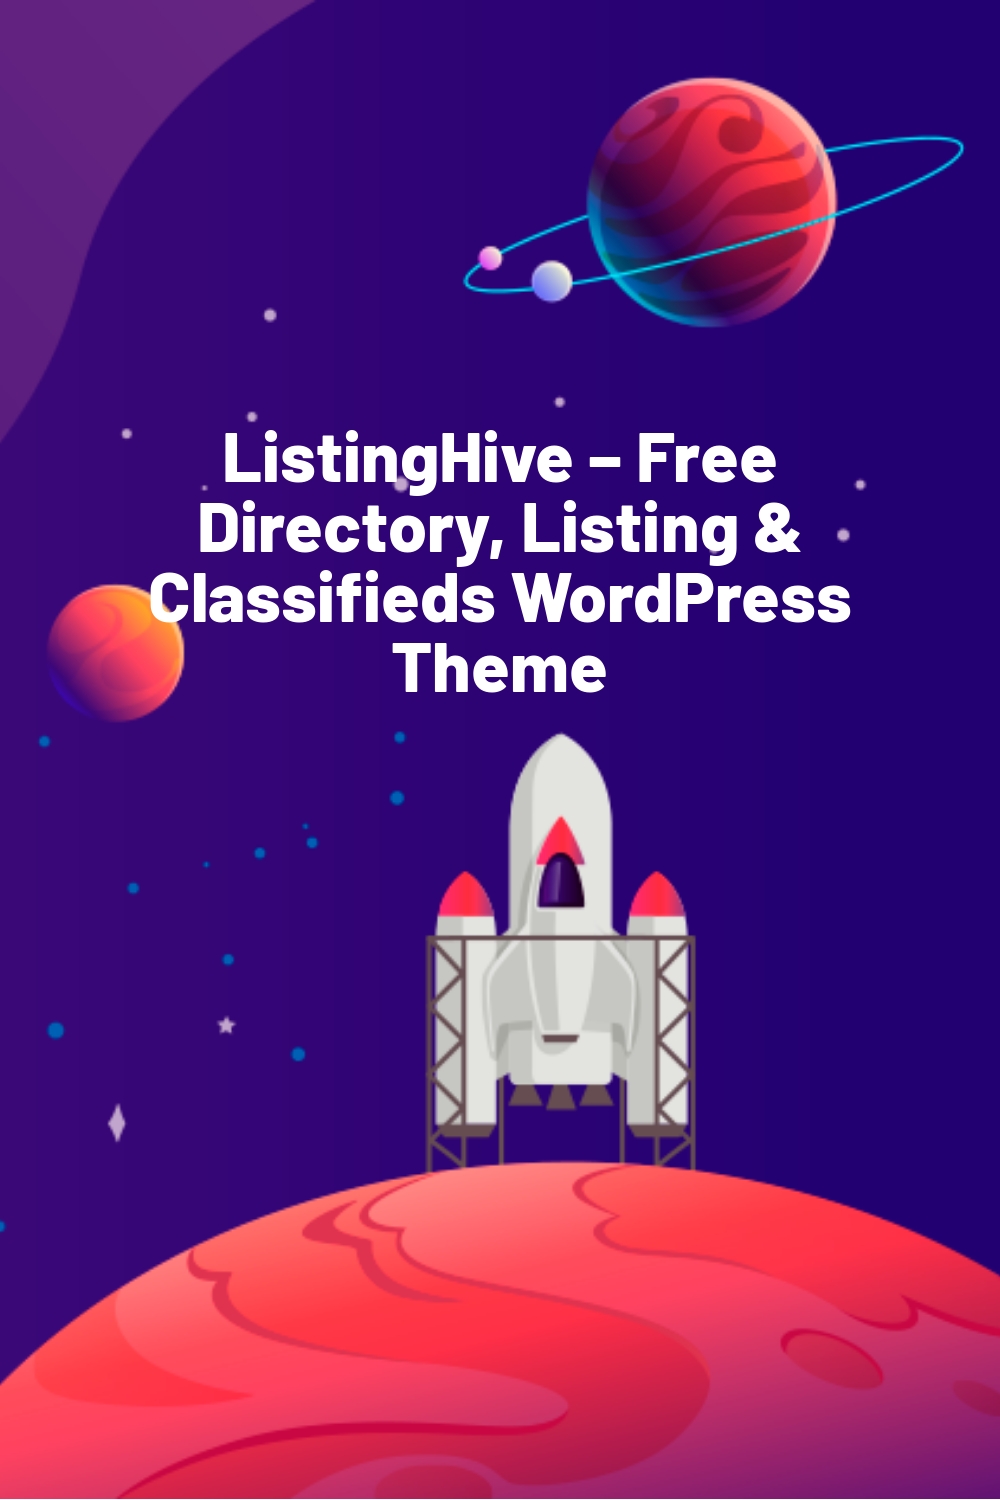 ListingHive – Free Directory, Listing & Classifieds WordPress Theme